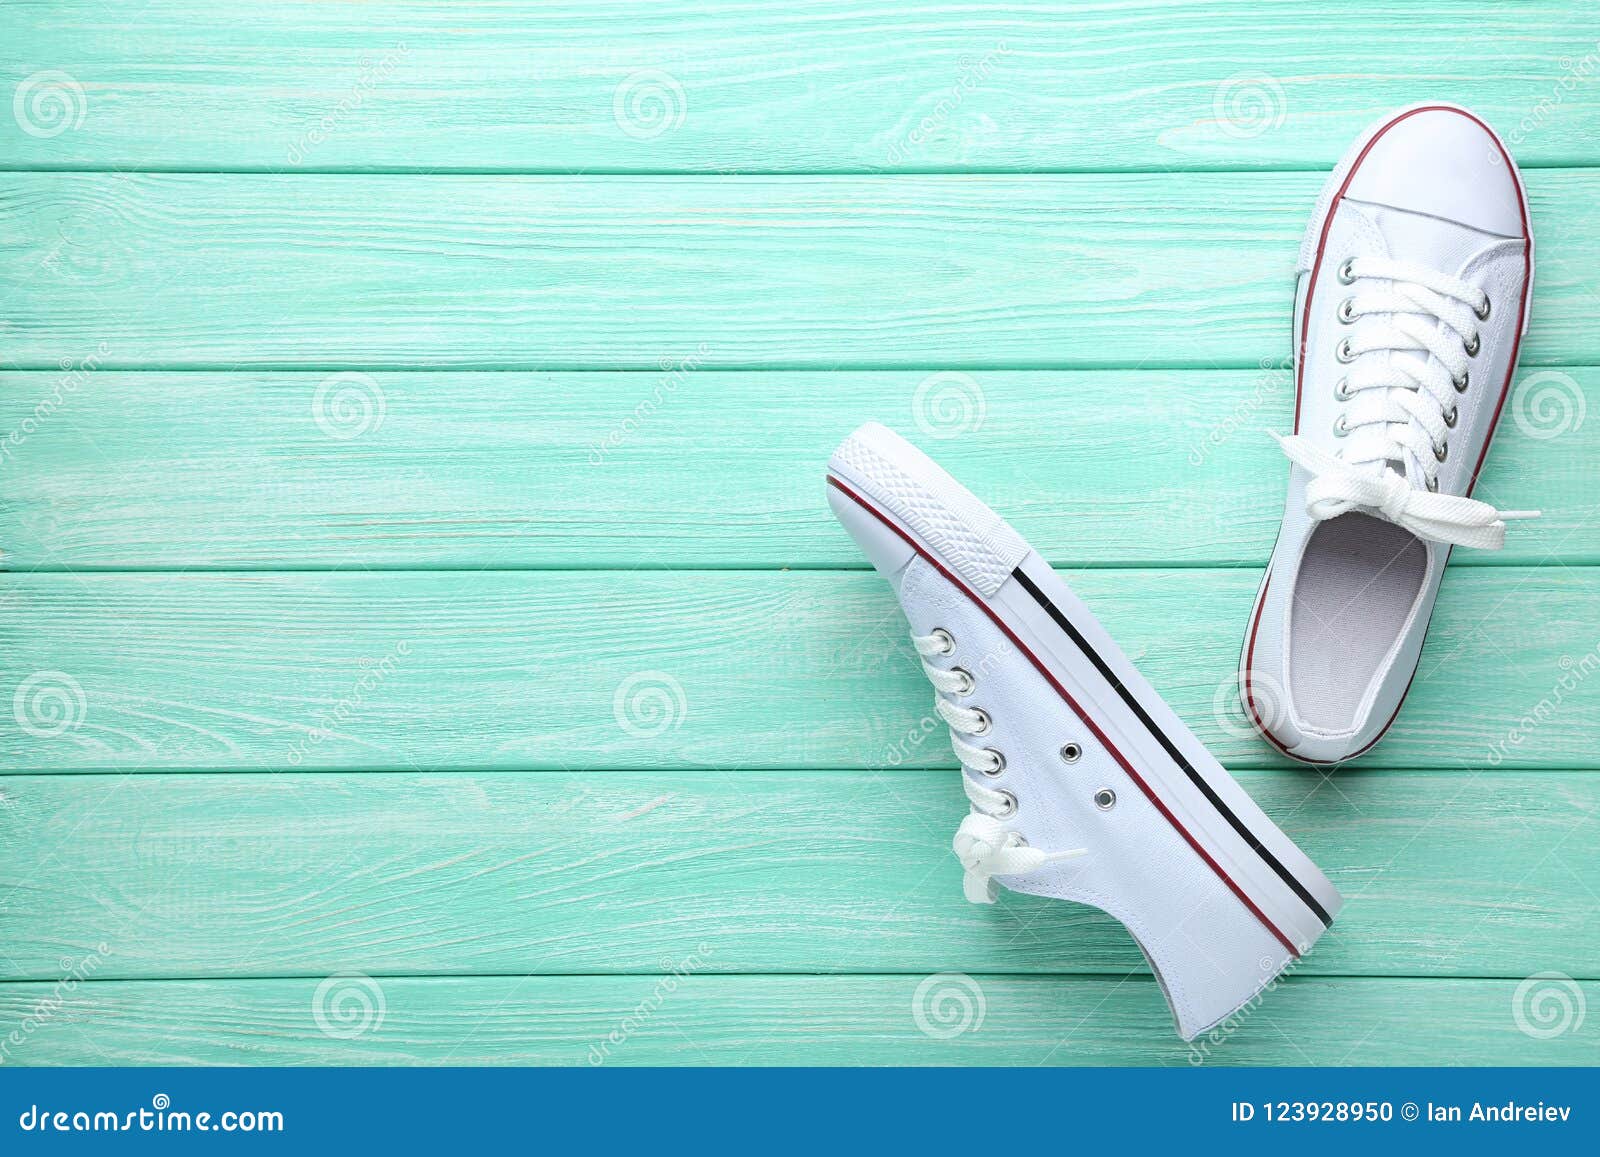 Pair of sneakers stock photo. Image of lace, clothing - 123928950